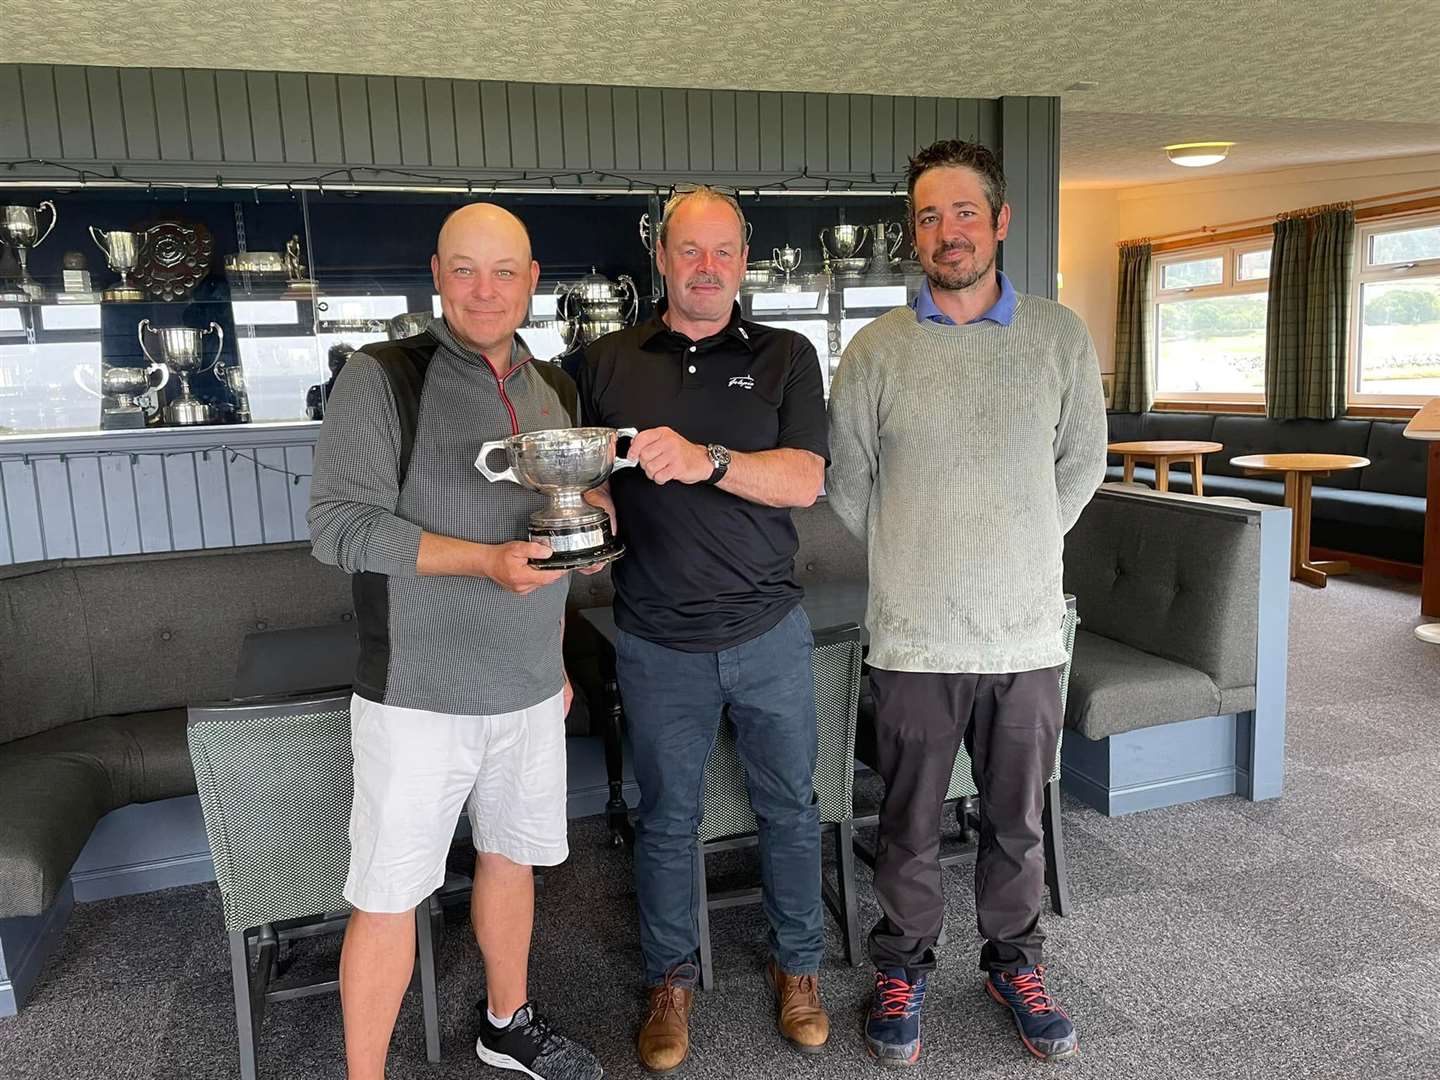 Bryan Urquhart receives the men's trophy from William MacBeath with Neil Edwards runners-up.